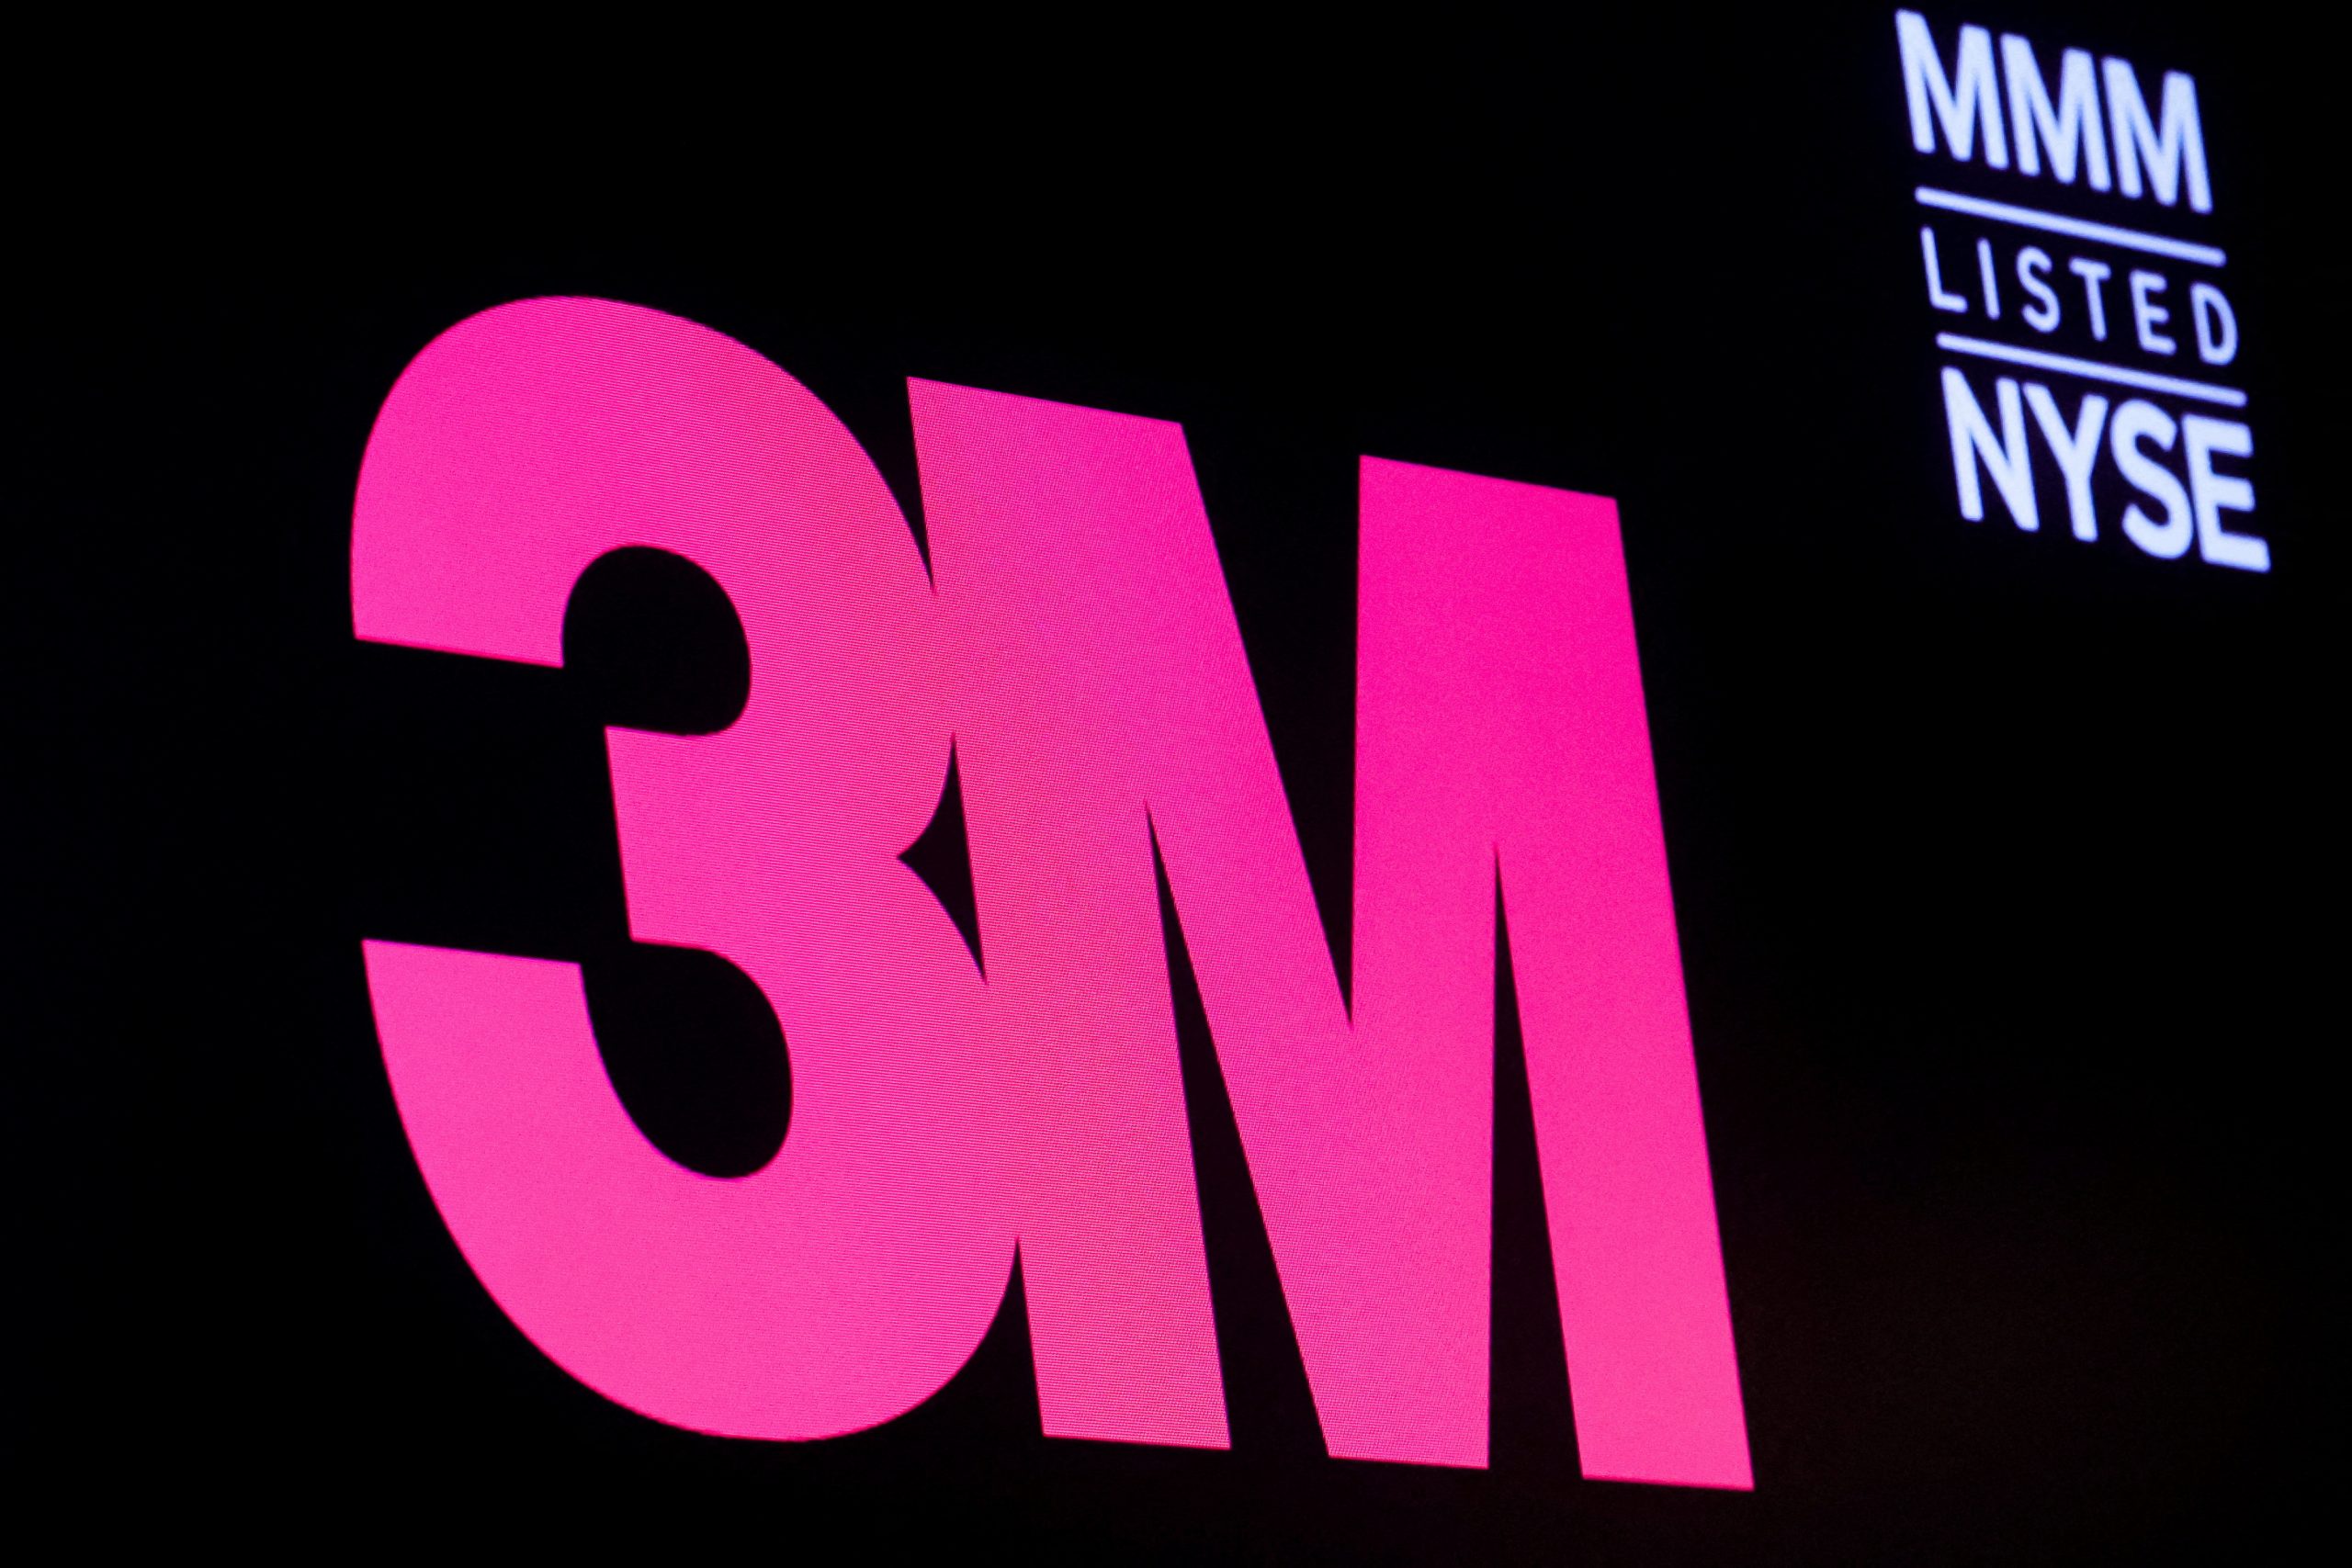 Why has 3M Decided to Pay a Significant Sum of $6 Billion to Resolve Combat Earplug Eawsuits?